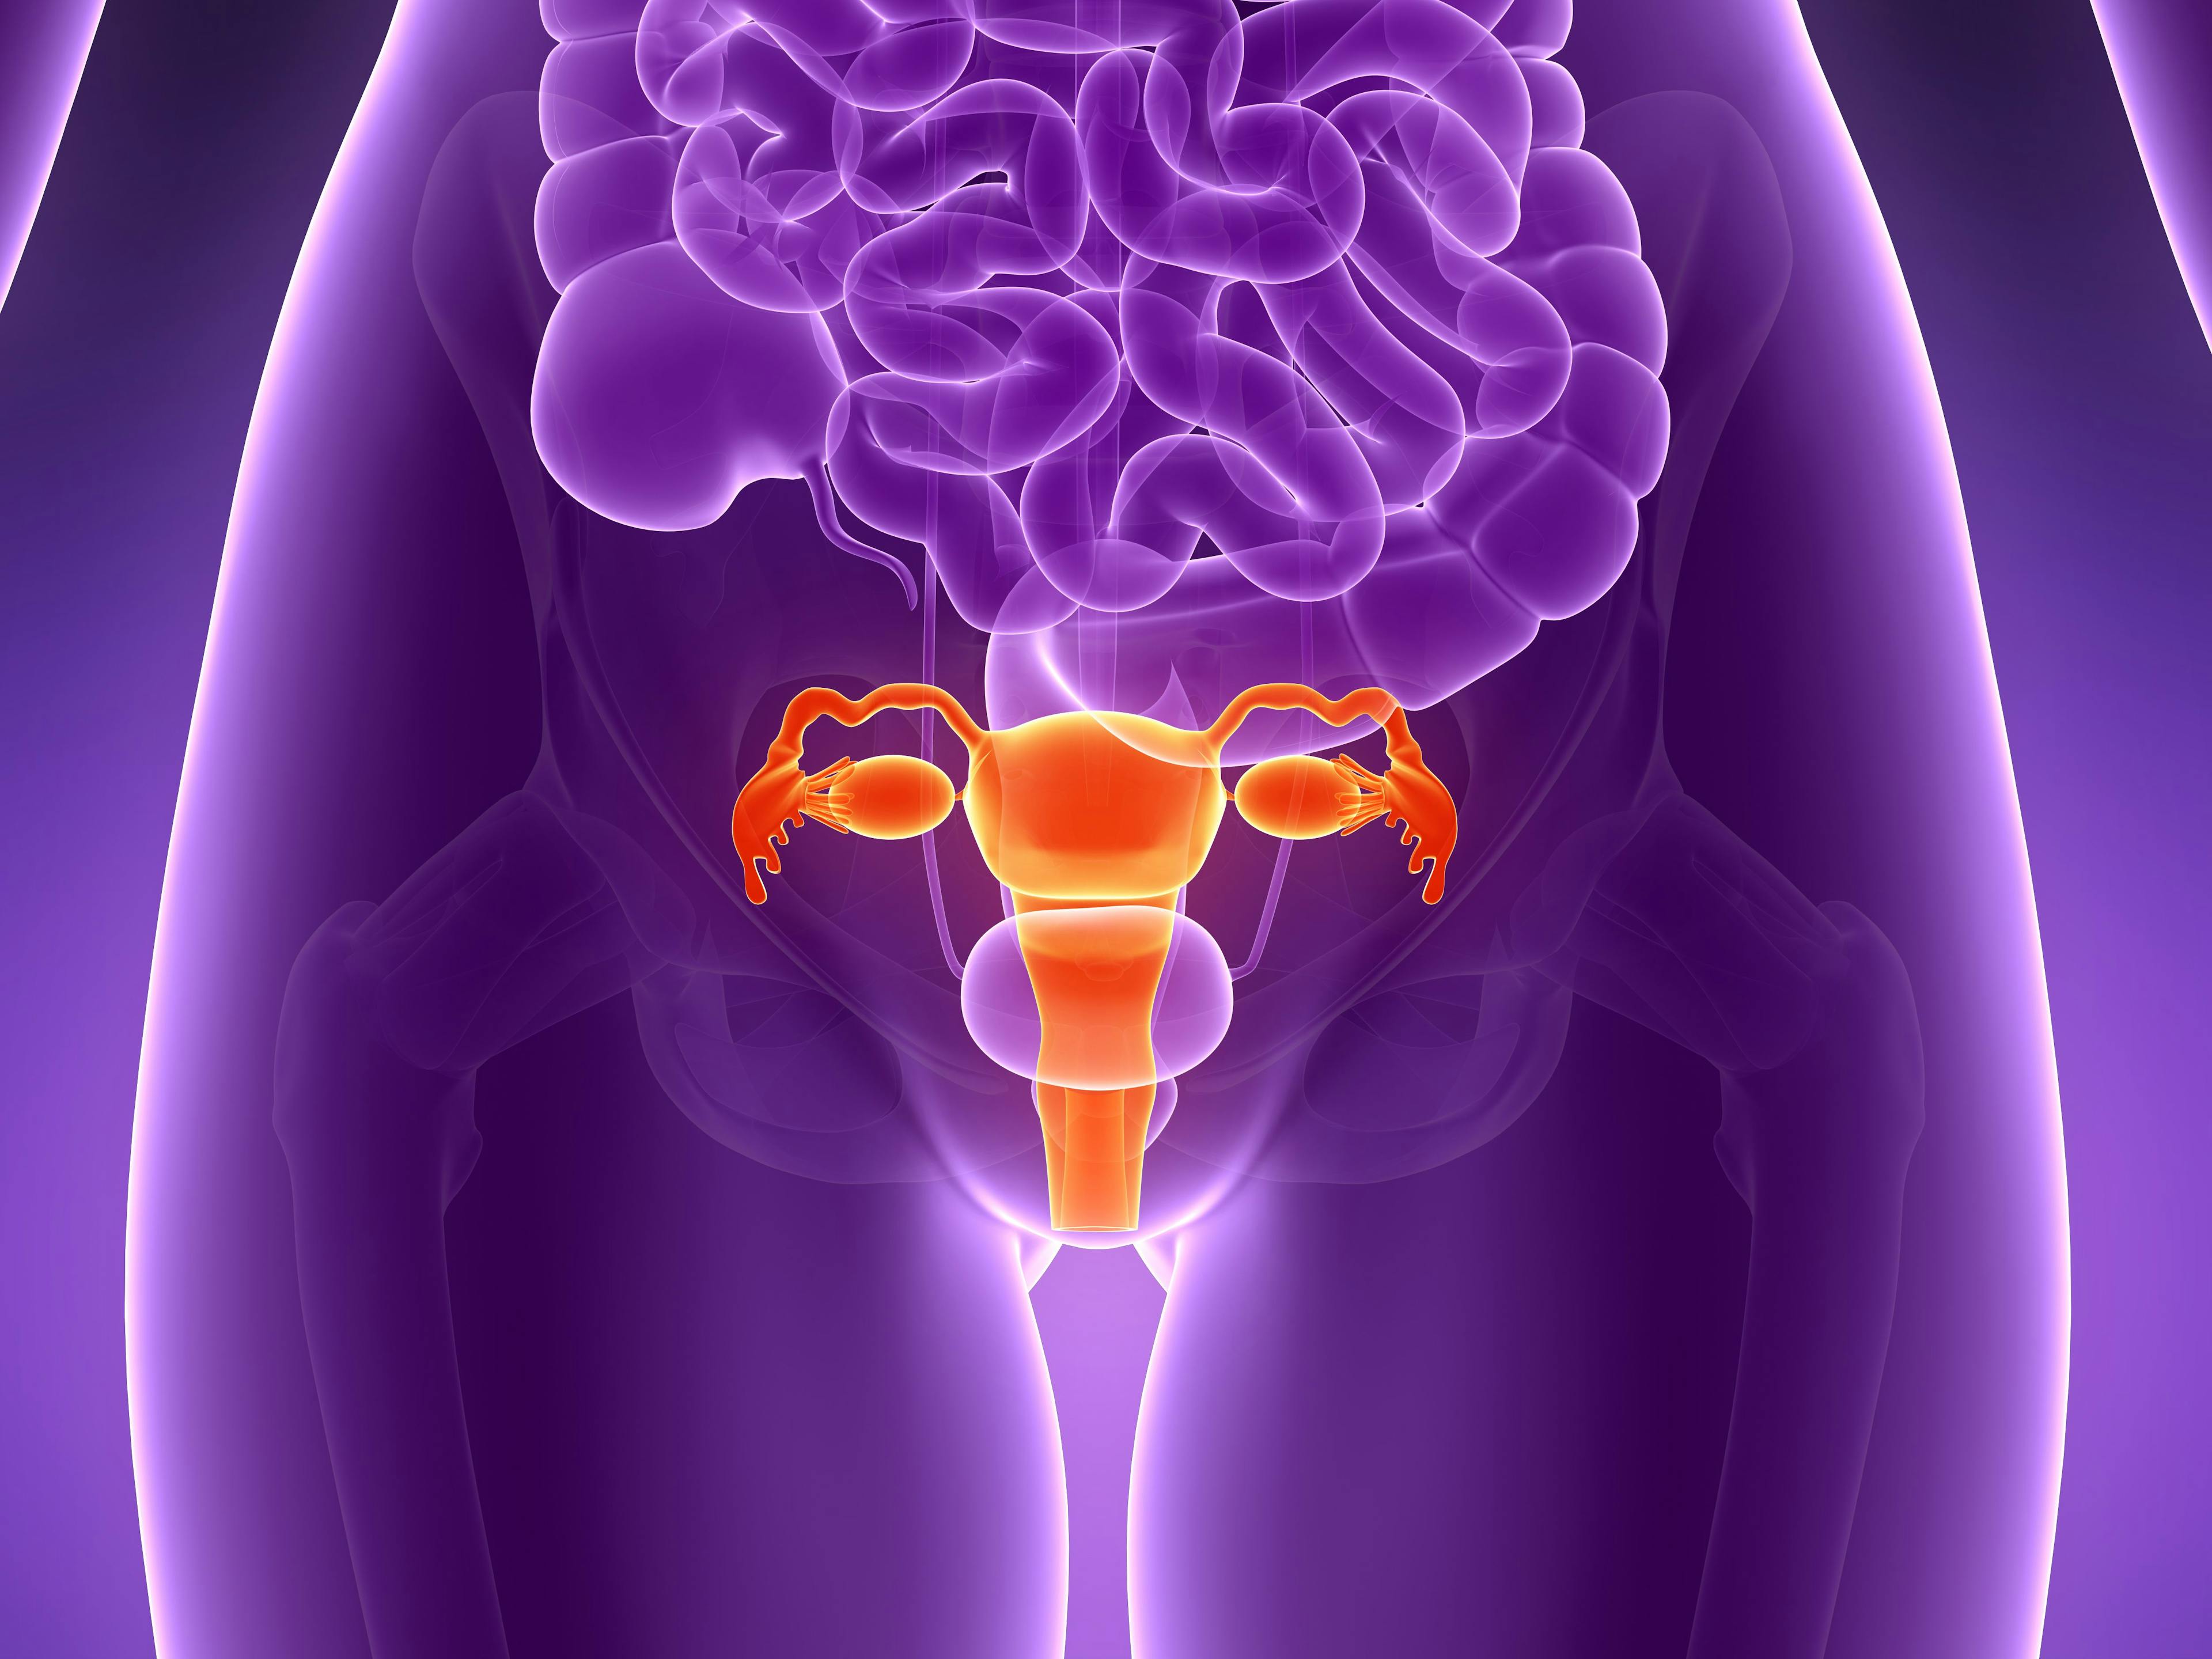 Financial Toxicity May Lead to Cost-Coping Strategies in Gynecologic Cancer